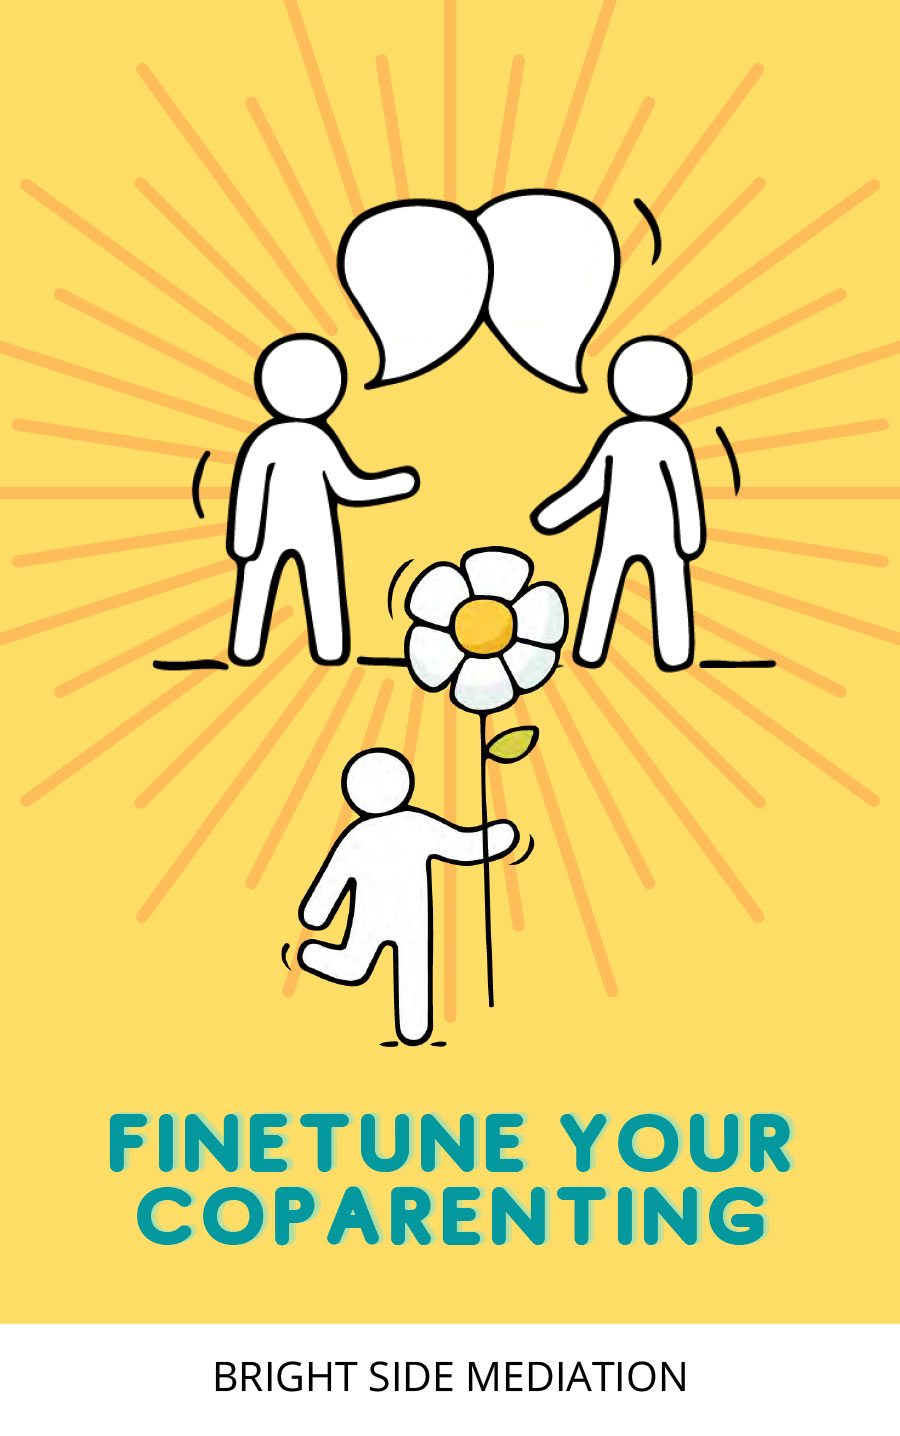 Finetune your coparenting